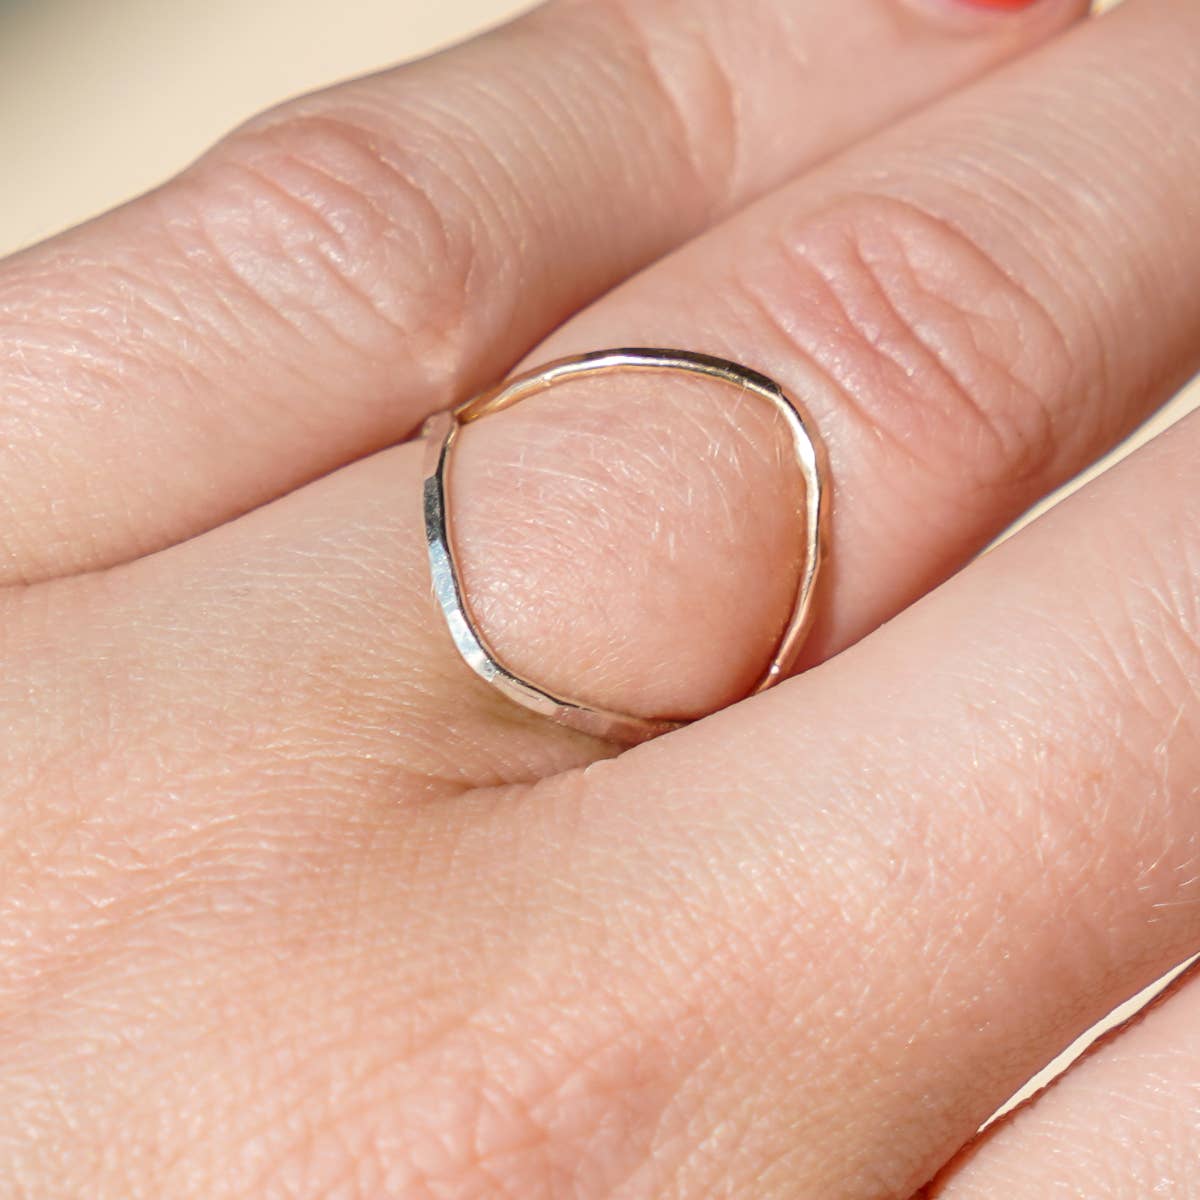 Dainty Vermeil or Sterling Silver Handcrafted Stackable Ring | Design House